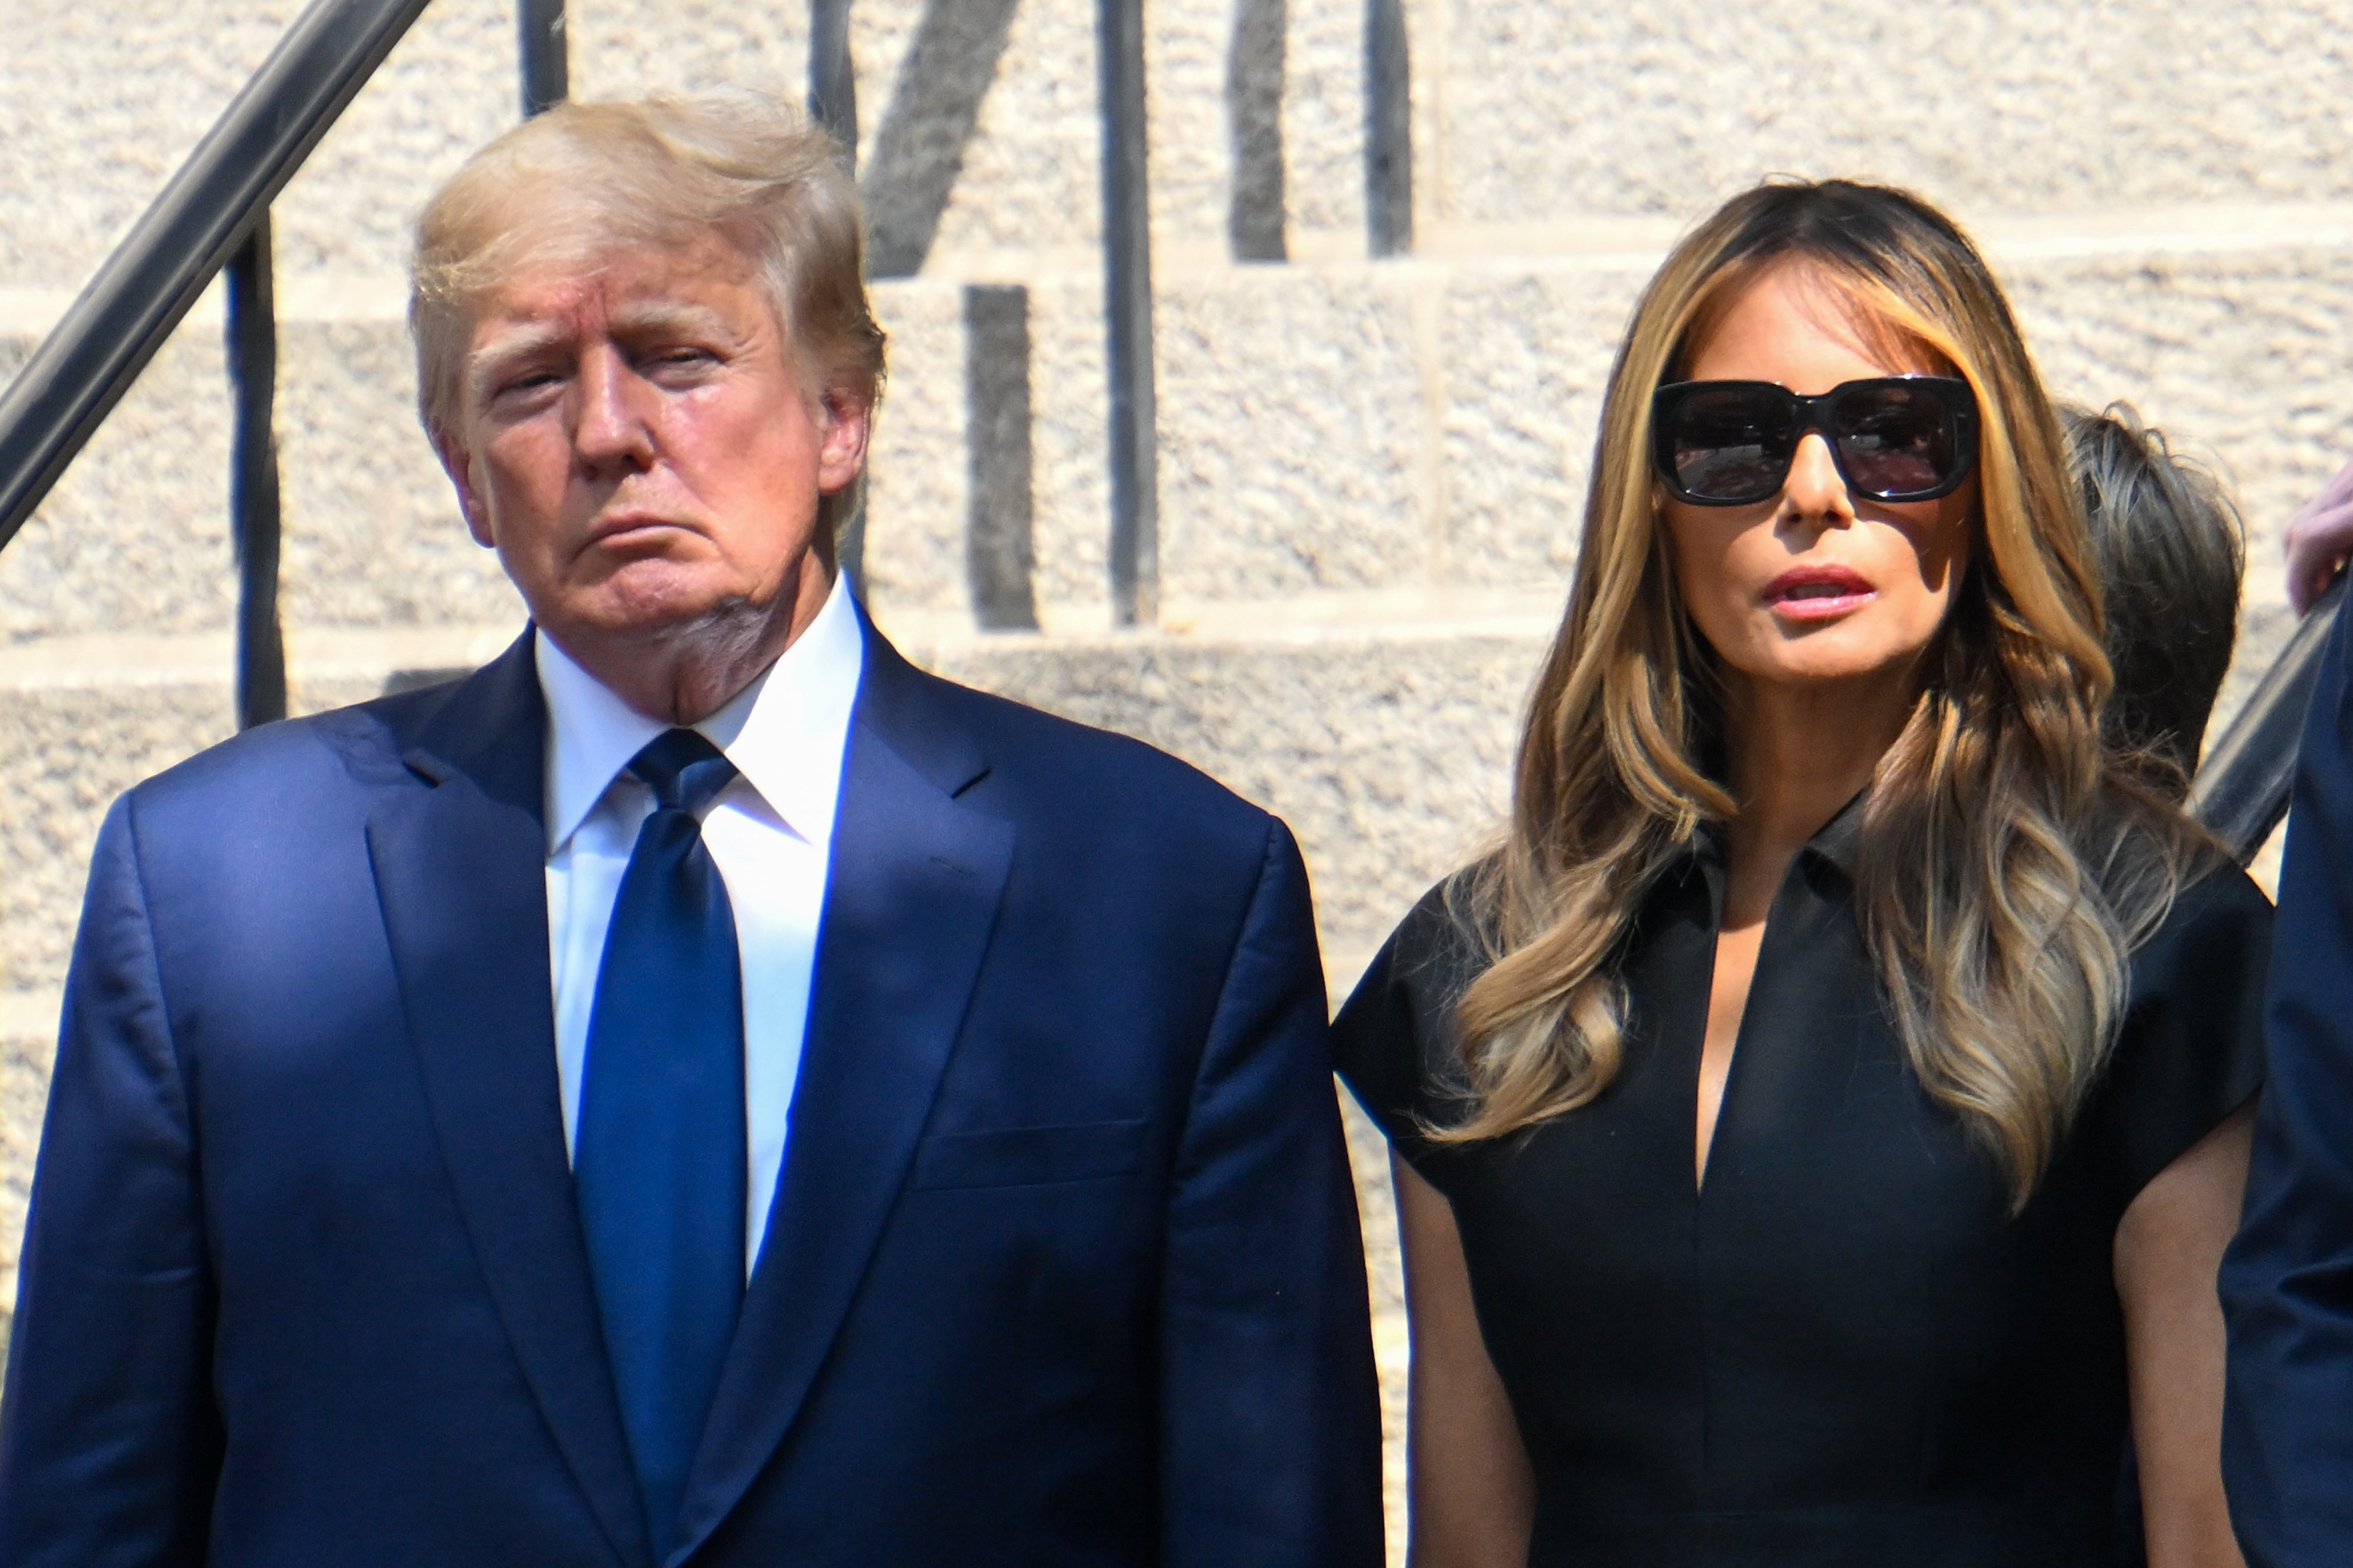 Former President Donald J. Trump and his wife Melania Trump exit the funeral of Ivana Trump at St. Vincent Ferrer Roman Catholic Church on July 20, 2022 in New York City.┃Source: Getty Images